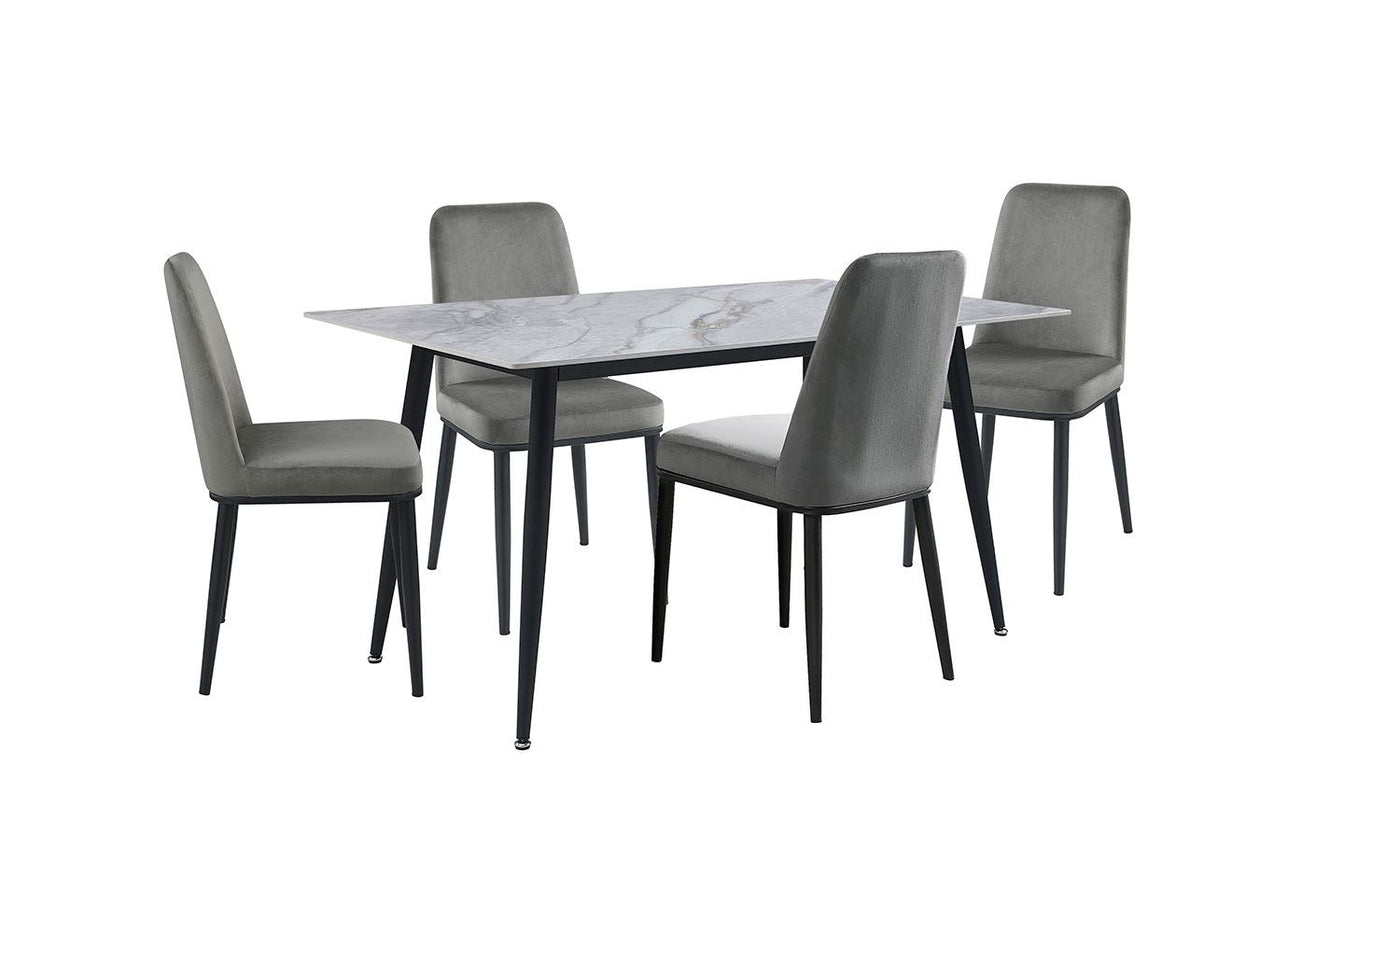 Emberly Sintered Stone Dining Table - Grey, Black